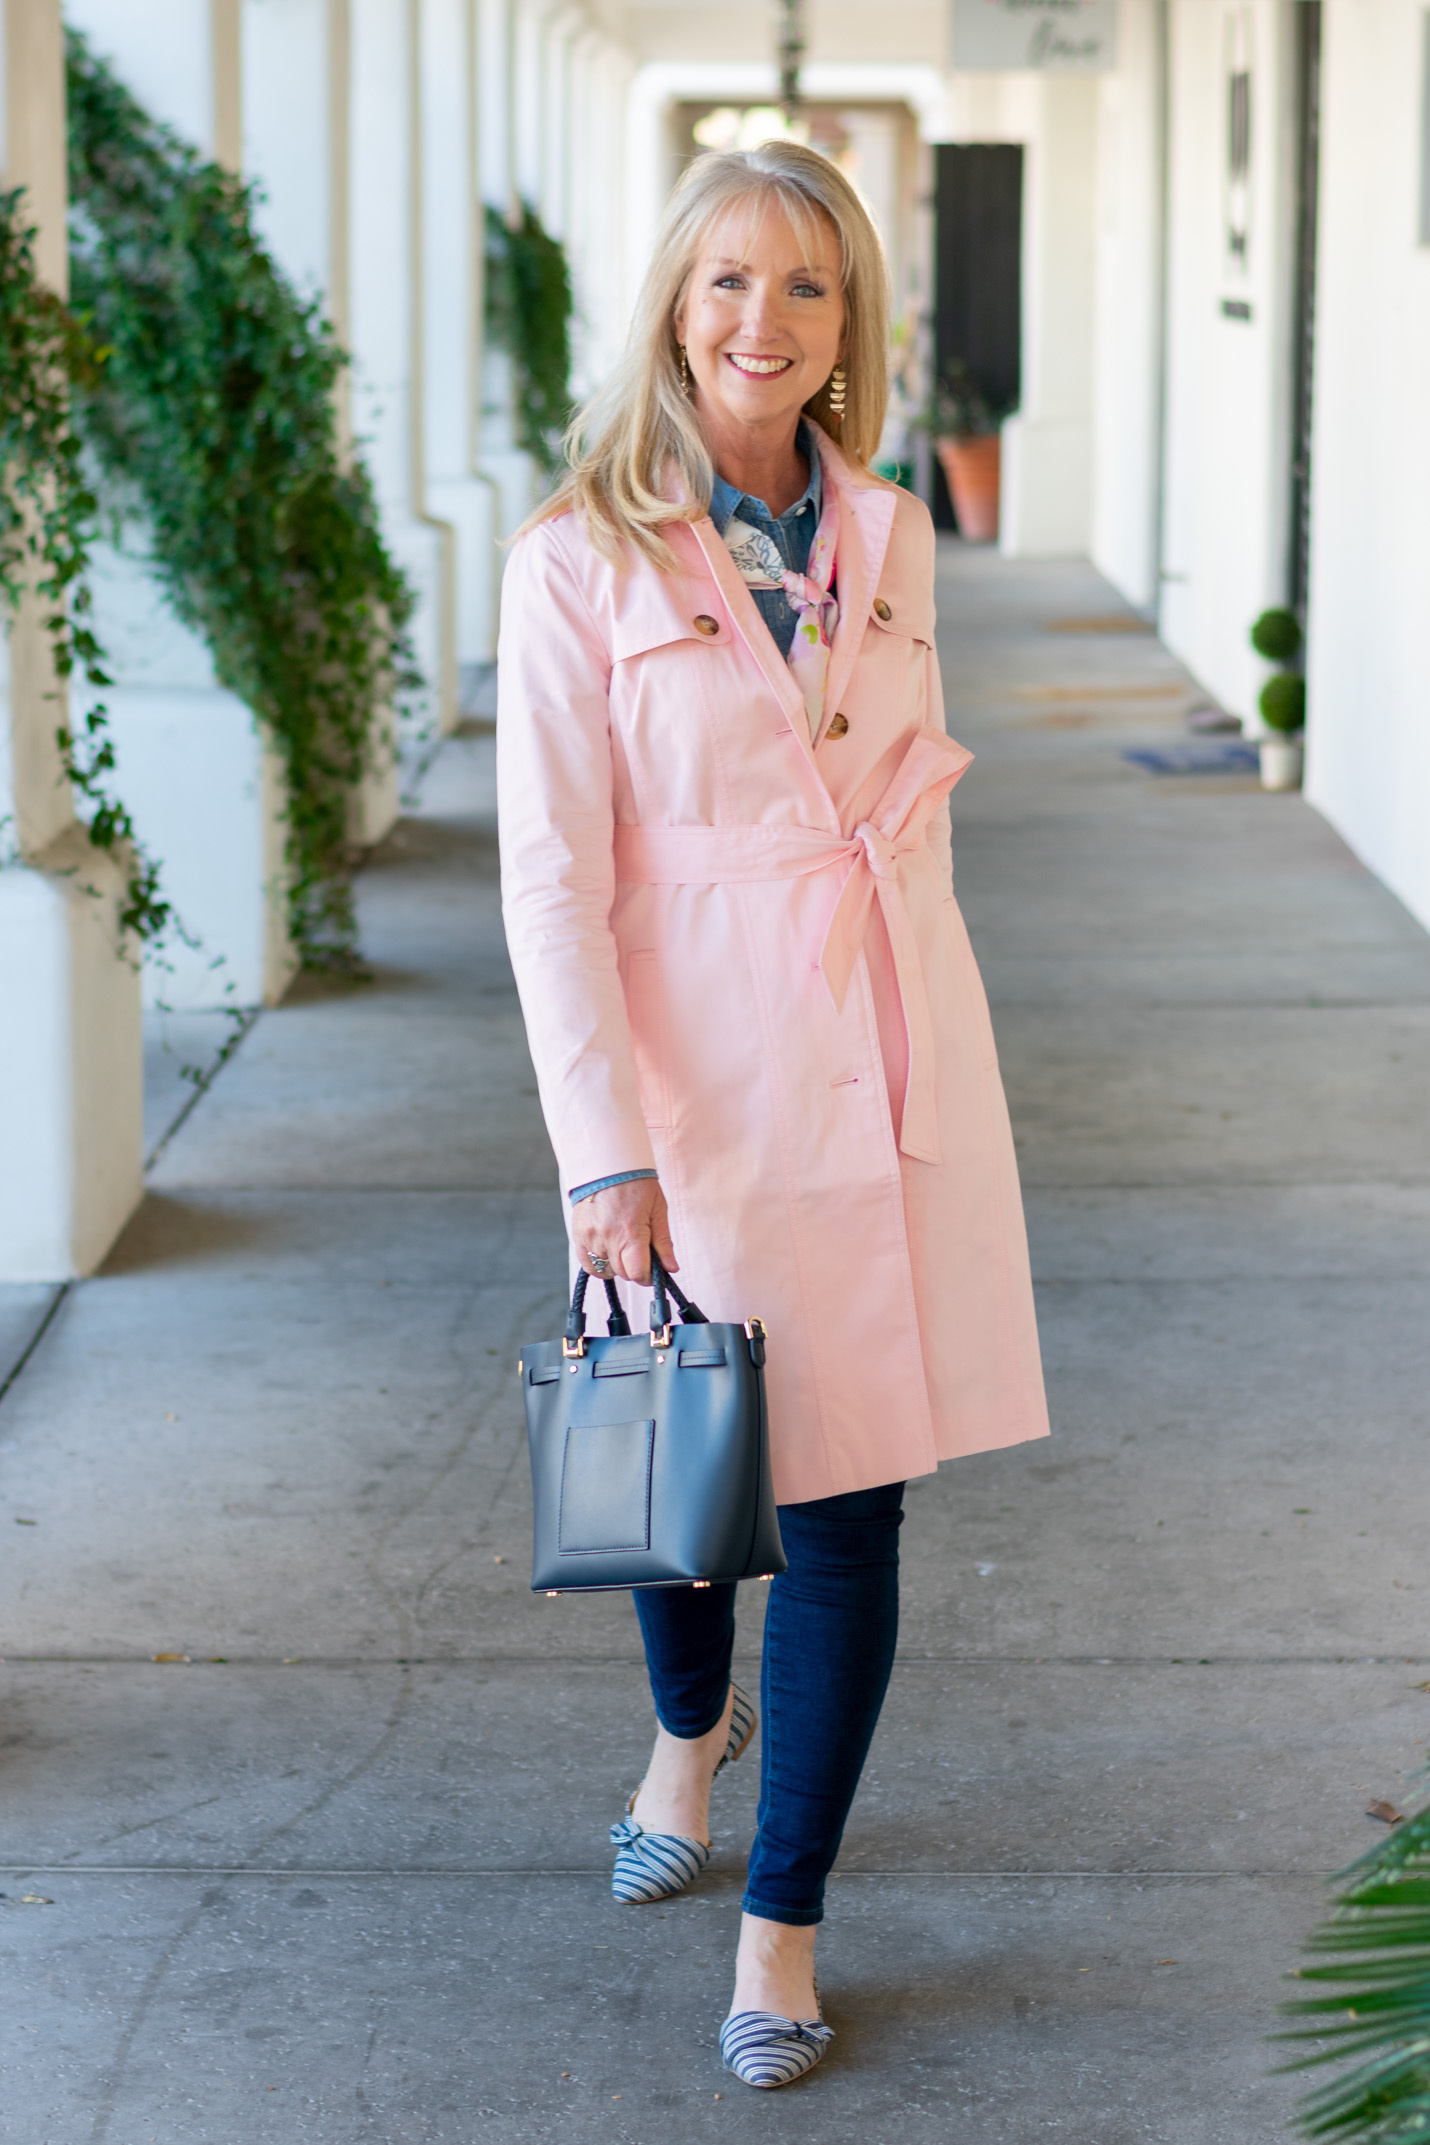 A Trench Coat for Spring